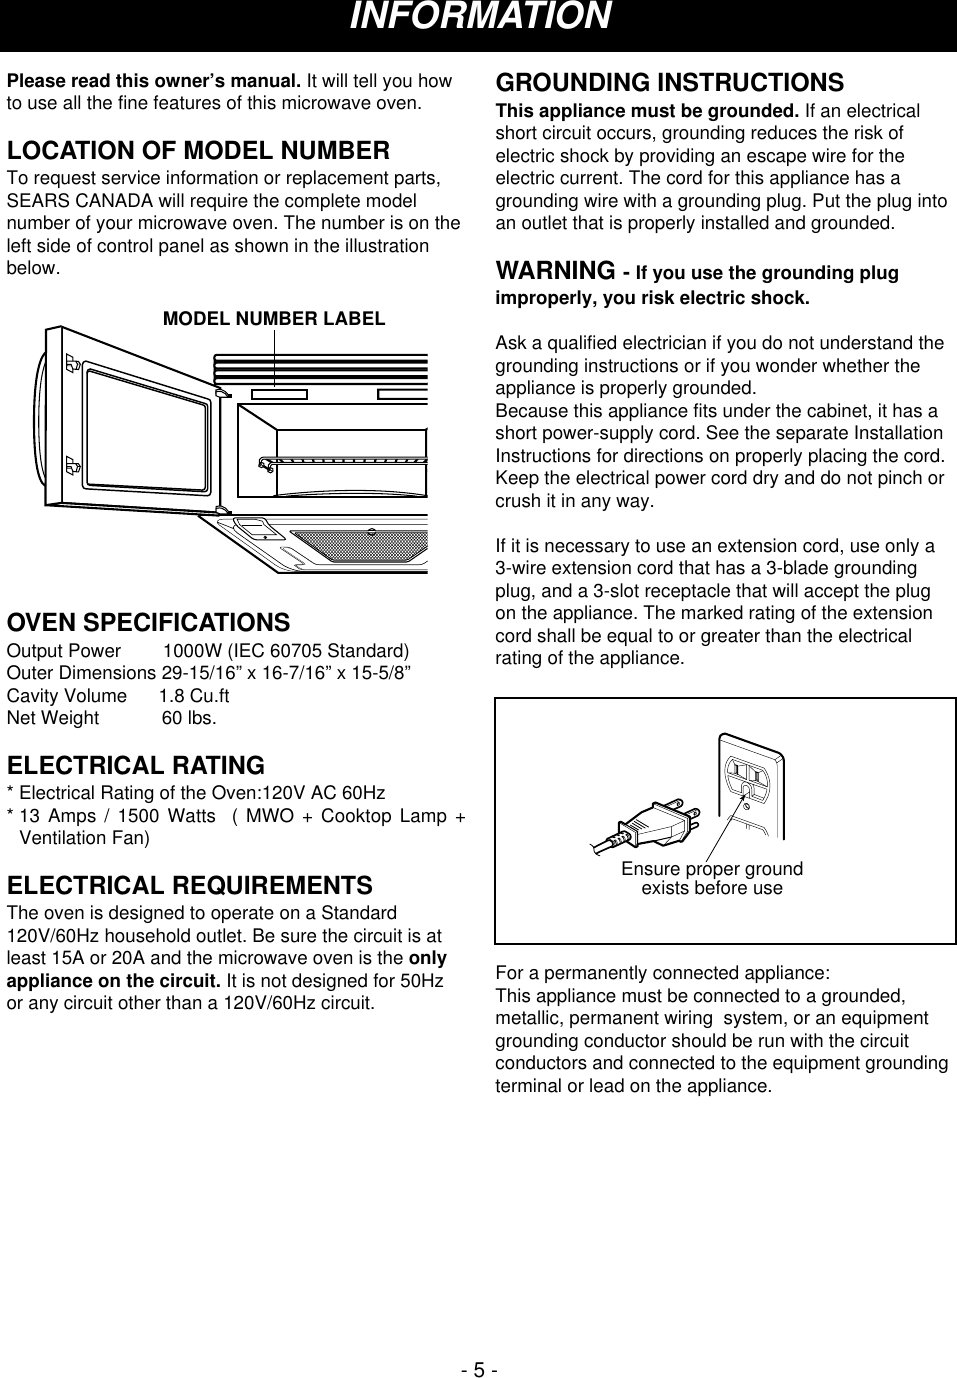 Please read this owner’s manual. It will tell you howto use all the fine features of this microwave oven. LOCATION OF MODEL NUMBERTo request service information or replacement parts,SEARS CANADA will require the complete modelnumber of your microwave oven. The number is on theleft side of control panel as shown in the illustrationbelow.OVEN SPECIFICATIONSOutput Power        1000W (IEC 60705 Standard)Outer Dimensions 29-15/16” x 16-7/16” x 15-5/8”Cavity Volume      1.8 Cu.ftNet Weight            60 lbs.ELECTRICAL RATING* Electrical Rating of the Oven:120V AC 60Hz* 13 Amps / 1500 Watts  ( MWO + Cooktop Lamp +Ventilation Fan)ELECTRICAL REQUIREMENTSThe oven is designed to operate on a Standard120V/60Hz household outlet. Be sure the circuit is atleast 15A or 20A and the microwave oven is the onlyappliance on the circuit. It is not designed for 50Hzor any circuit other than a 120V/60Hz circuit.GROUNDING INSTRUCTIONSThis appliance must be grounded. If an electricalshort circuit occurs, grounding reduces the risk ofelectric shock by providing an escape wire for theelectric current. The cord for this appliance has agrounding wire with a grounding plug. Put the plug intoan outlet that is properly installed and grounded.WARNING - If you use the grounding plugimproperly, you risk electric shock.Ask a qualified electrician if you do not understand thegrounding instructions or if you wonder whether theappliance is properly grounded.Because this appliance fits under the cabinet, it has ashort power-supply cord. See the separate InstallationInstructions for directions on properly placing the cord.Keep the electrical power cord dry and do not pinch orcrush it in any way.If it is necessary to use an extension cord, use only a3-wire extension cord that has a 3-blade groundingplug, and a 3-slot receptacle that will accept the plugon the appliance. The marked rating of the extensioncord shall be equal to or greater than the electricalrating of the appliance.For a permanently connected appliance:This appliance must be connected to a grounded,metallic, permanent wiring  system, or an equipmentgrounding conductor should be run with the circuitconductors and connected to the equipment groundingterminal or lead on the appliance.Ensure proper groundexists before useMODEL NUMBER LABELINFORMATION- 5 -